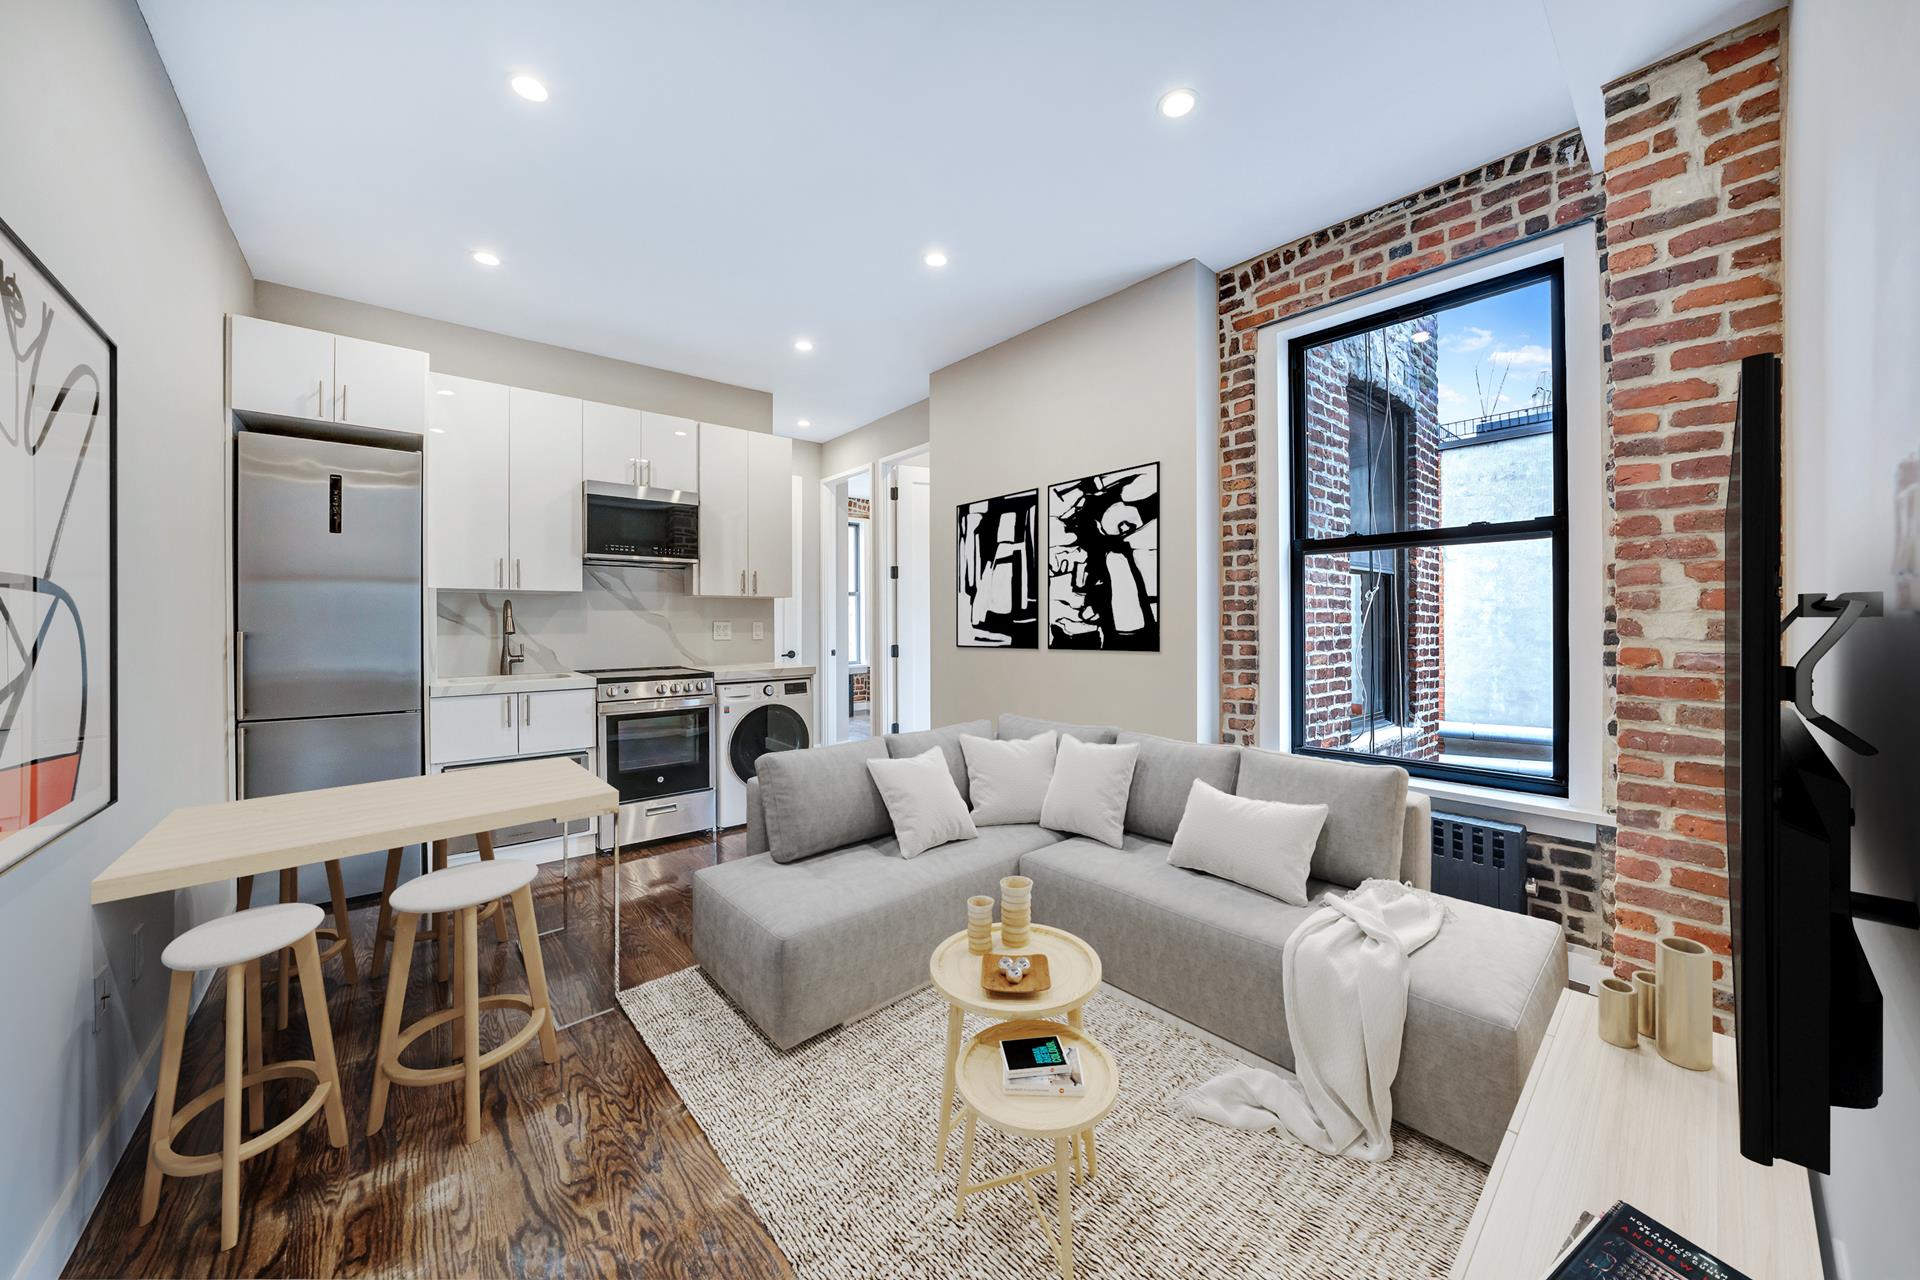 228 8th Avenue 21, Chelsea, Downtown, NYC - 4 Bedrooms  
2 Bathrooms  
7 Rooms - 